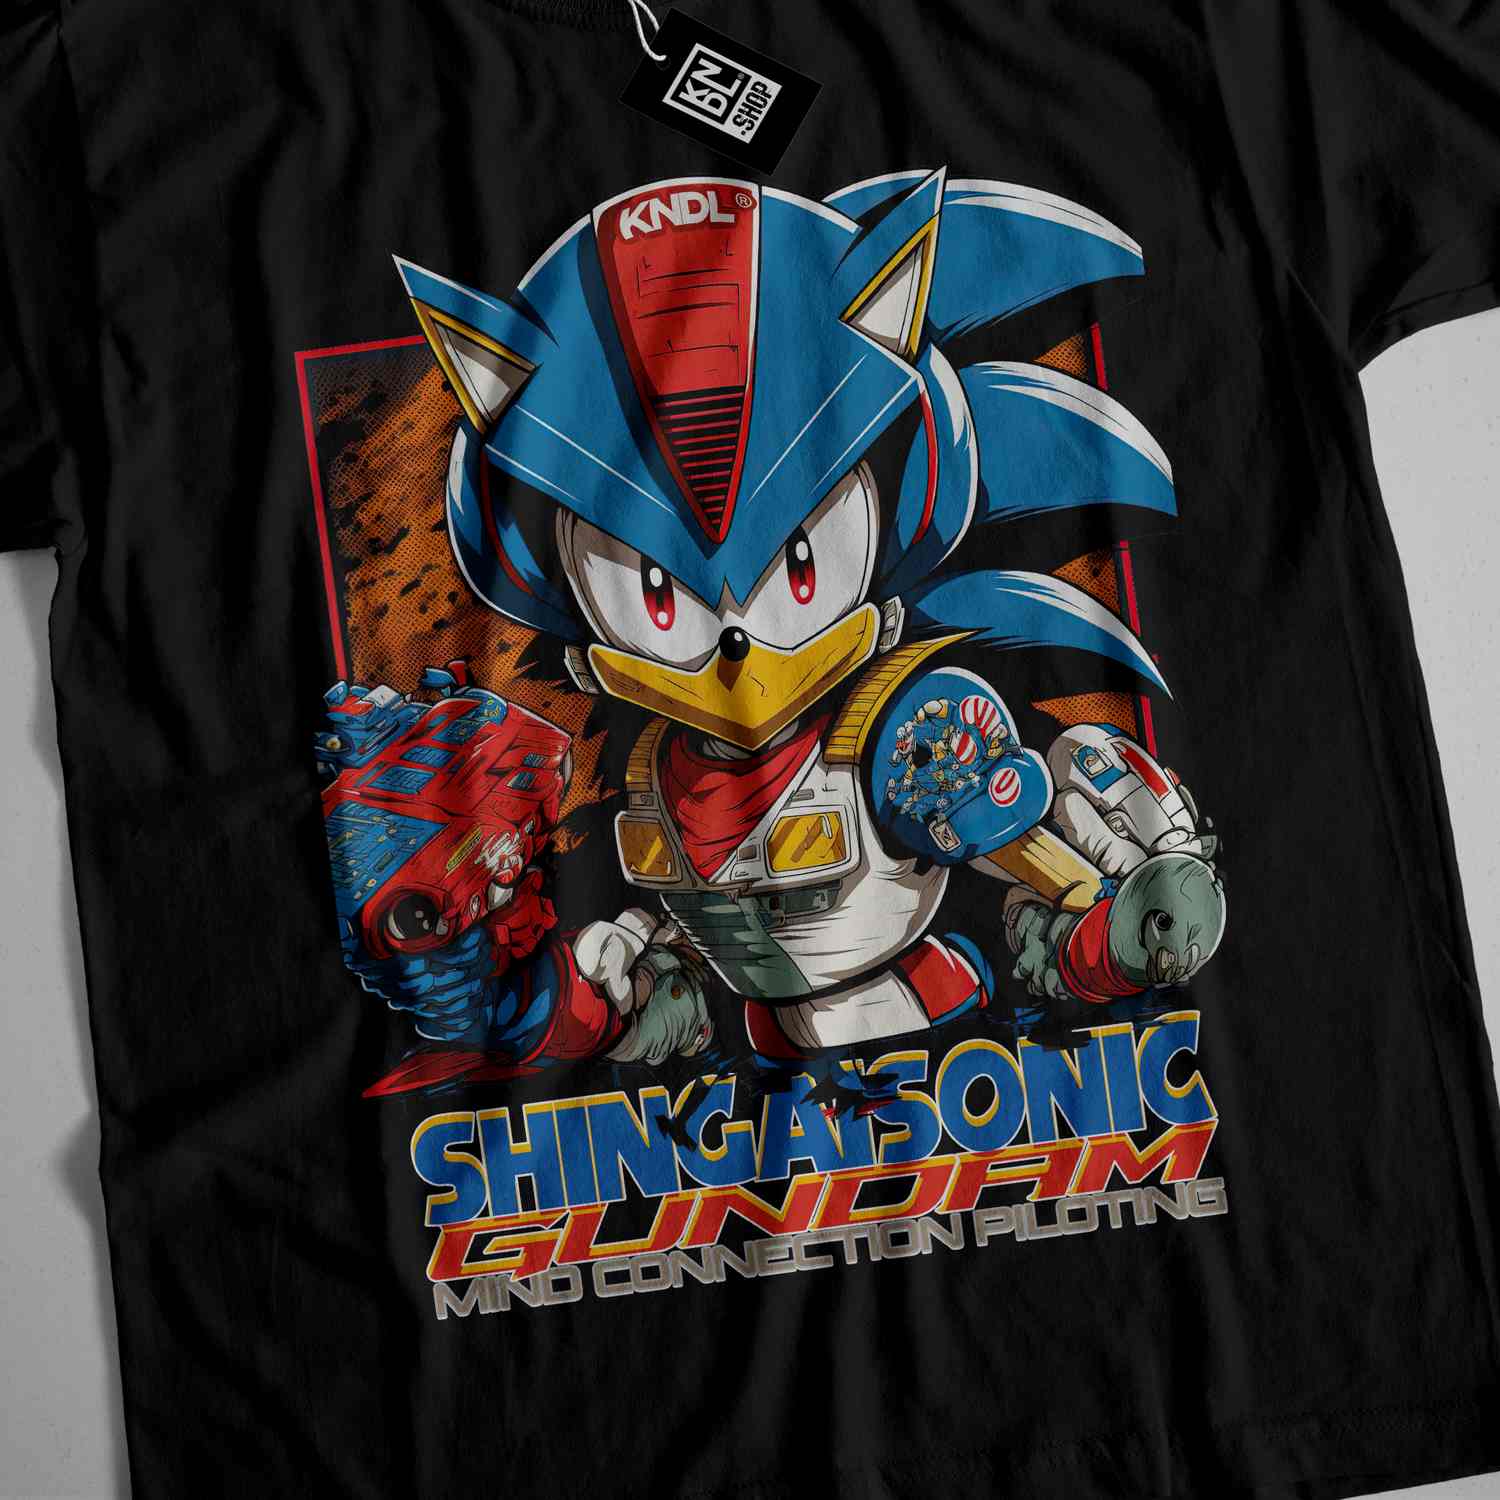 a t - shirt with a picture of a sonic the hedge character on it